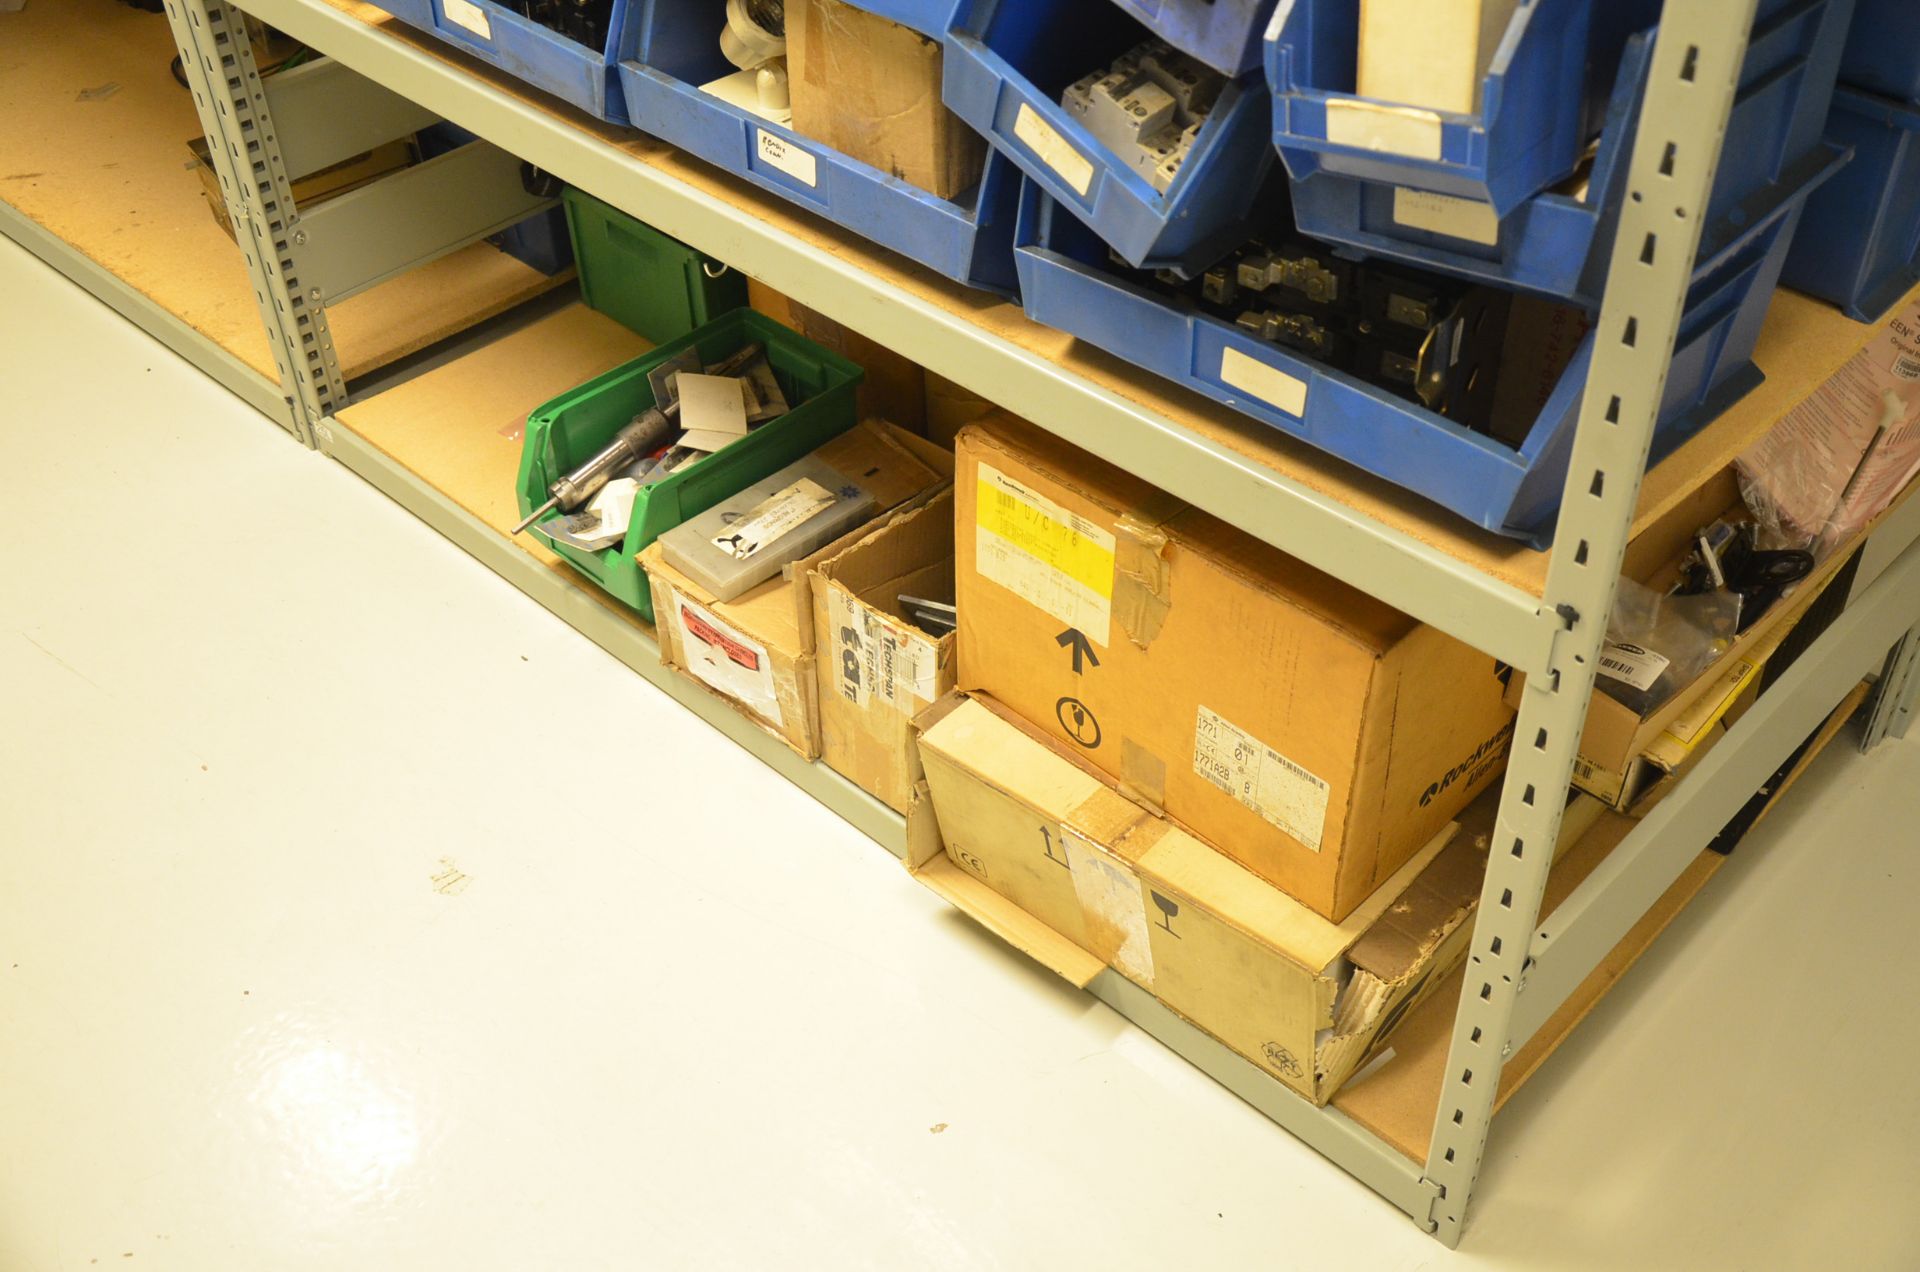 LOT/ CONTENTS OF RACK - ALLEN BRADLEY AND POWERFLEX VFD DRIVES AND PLC COMPONENTS - Image 8 of 14